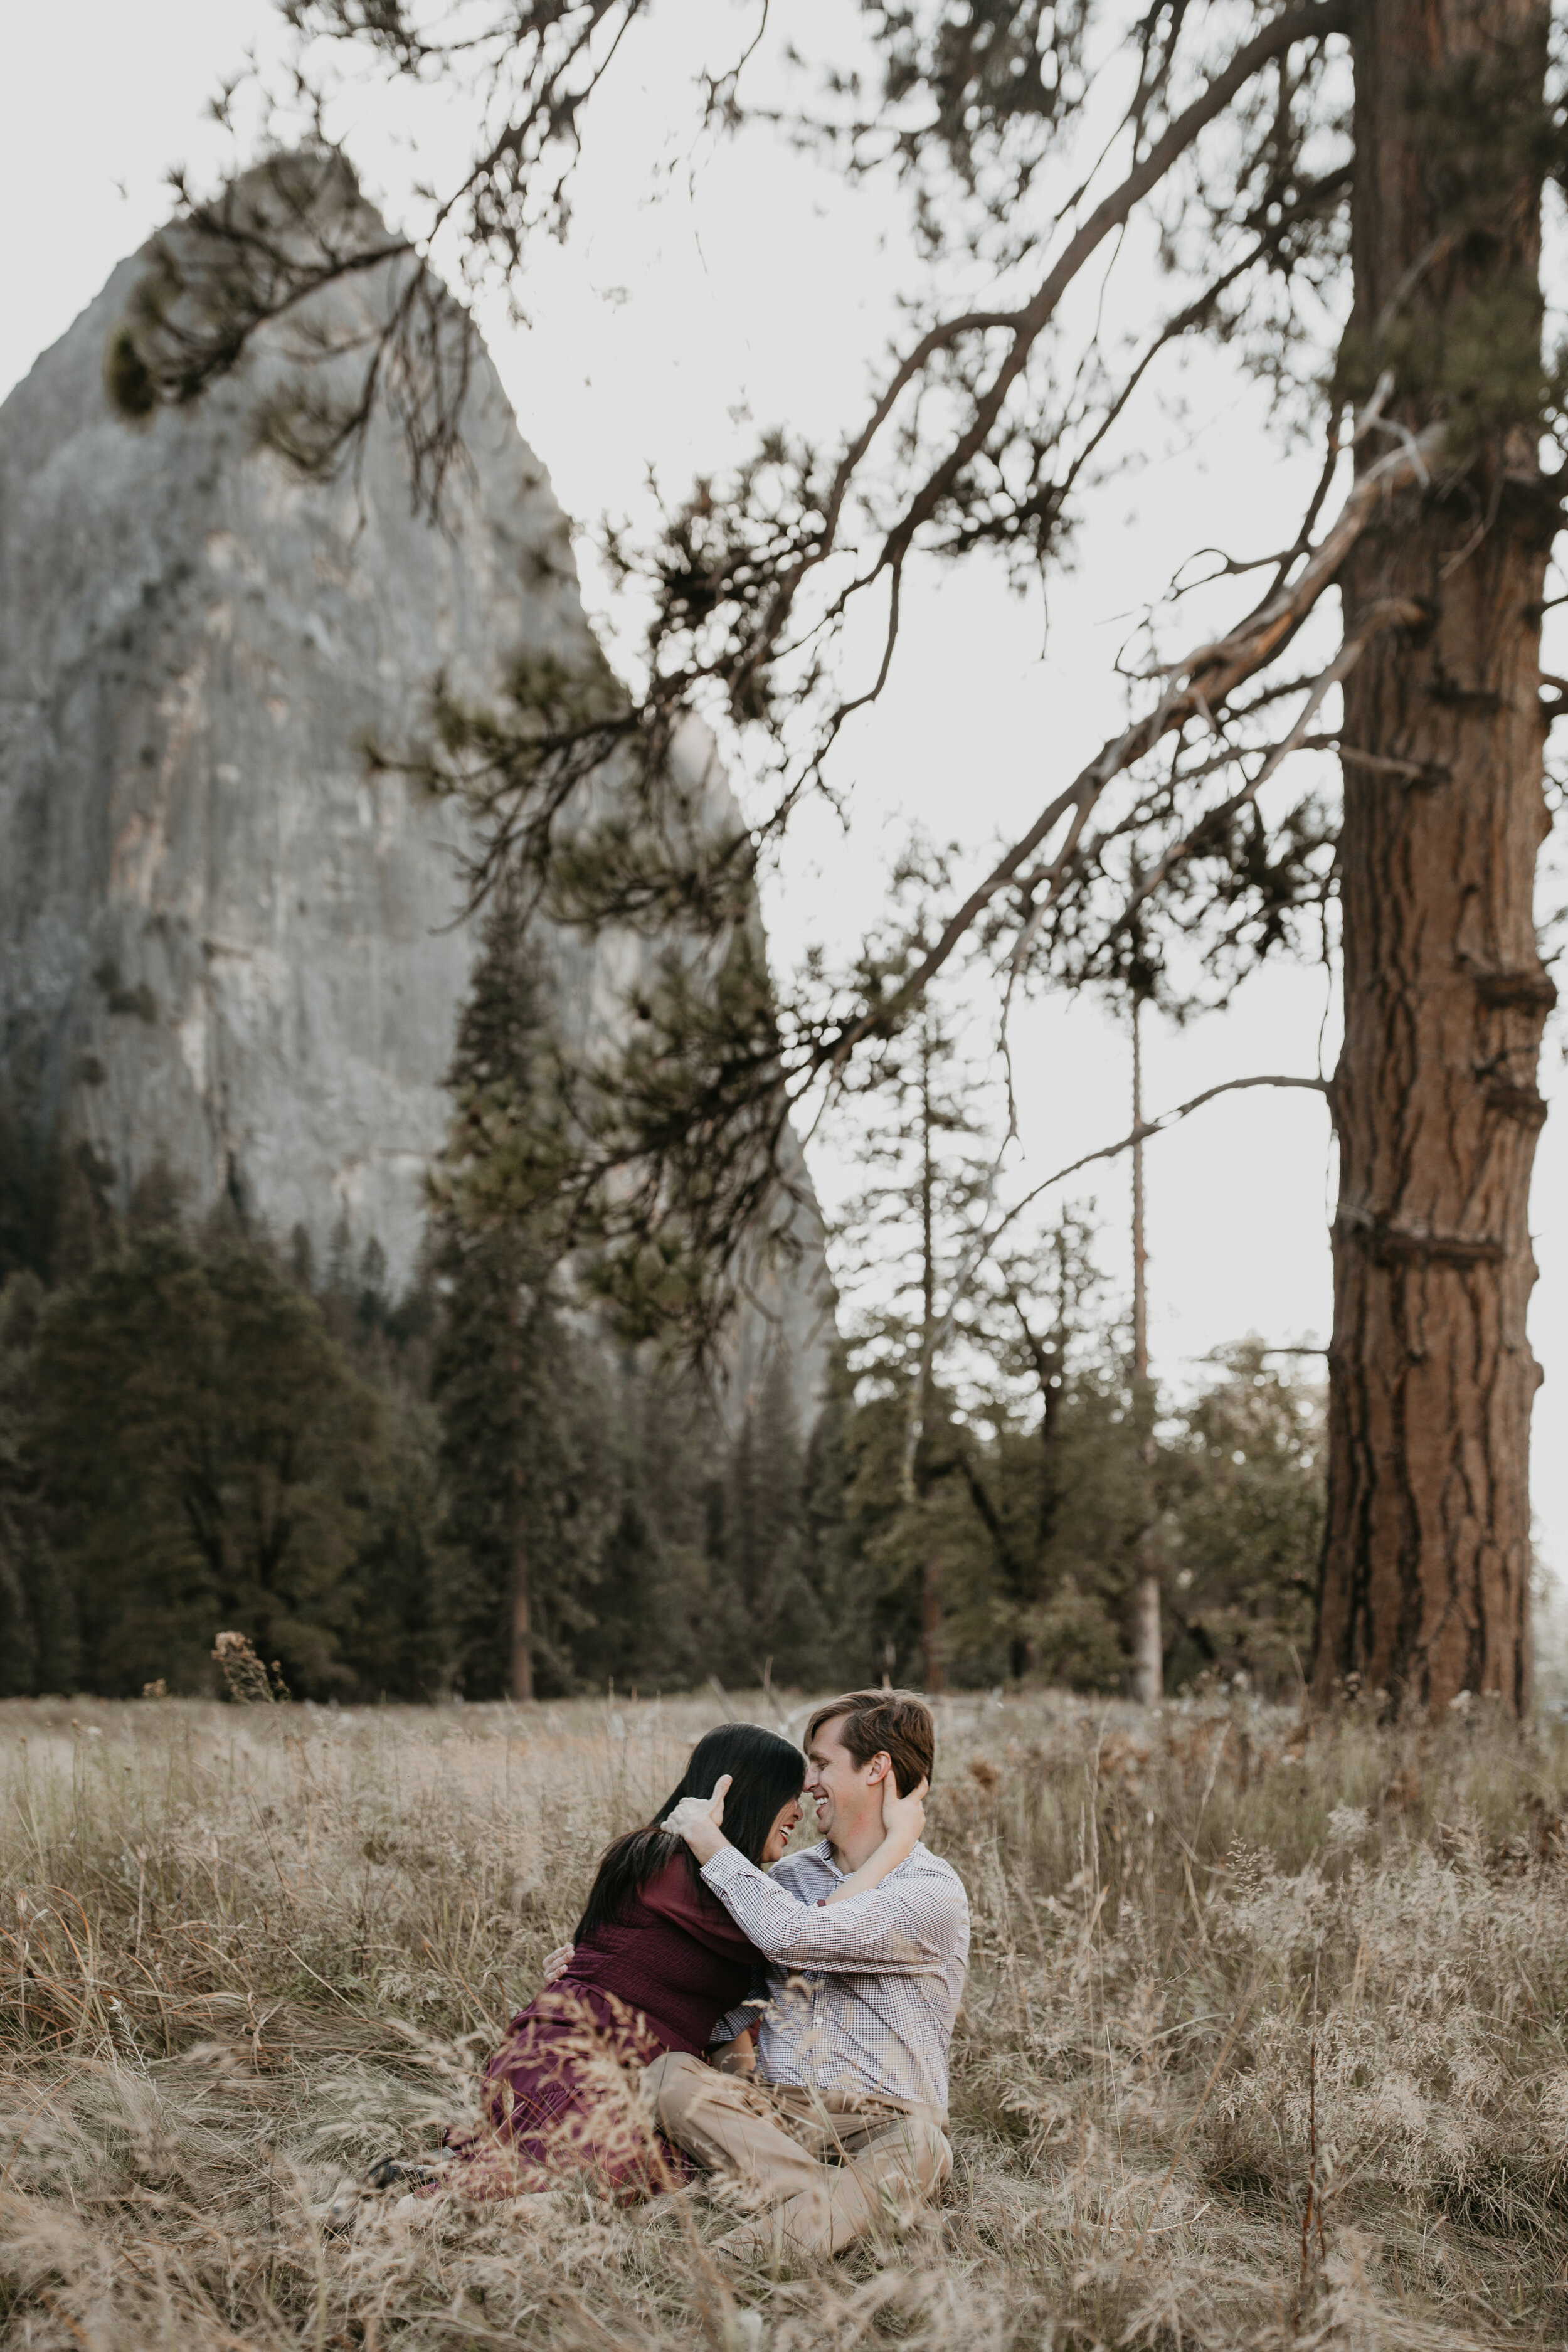 yosemite-national-park-couples-session-at-taft-point-and-yosemite-valley-yosemite-elopement-photographer-nicole-daacke-photography-112.jpg